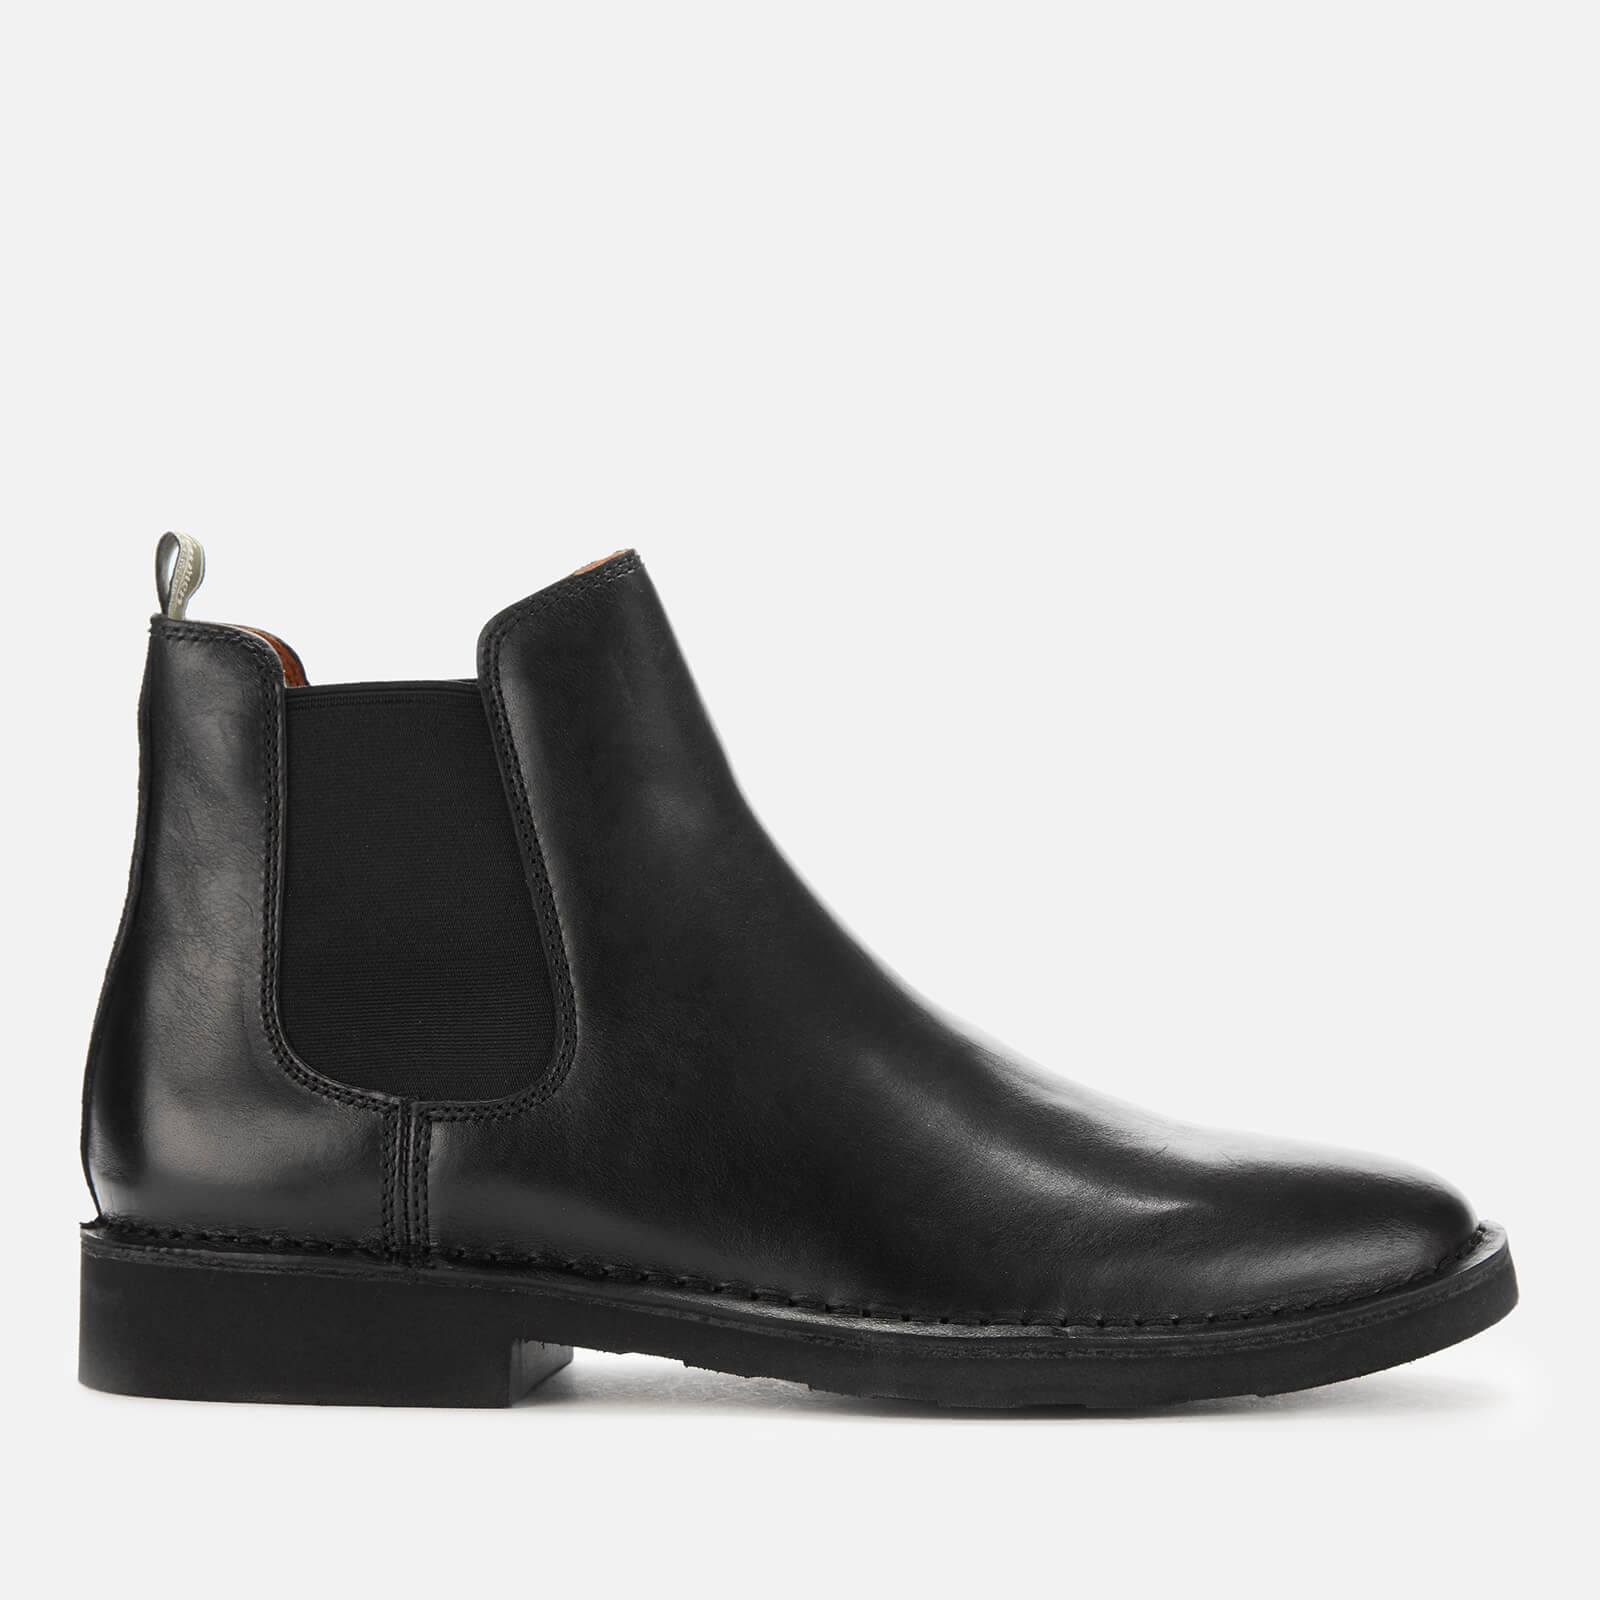 Polo Ralph Lauren Men’s Talan Smooth Leather Chelsea Boots - Black